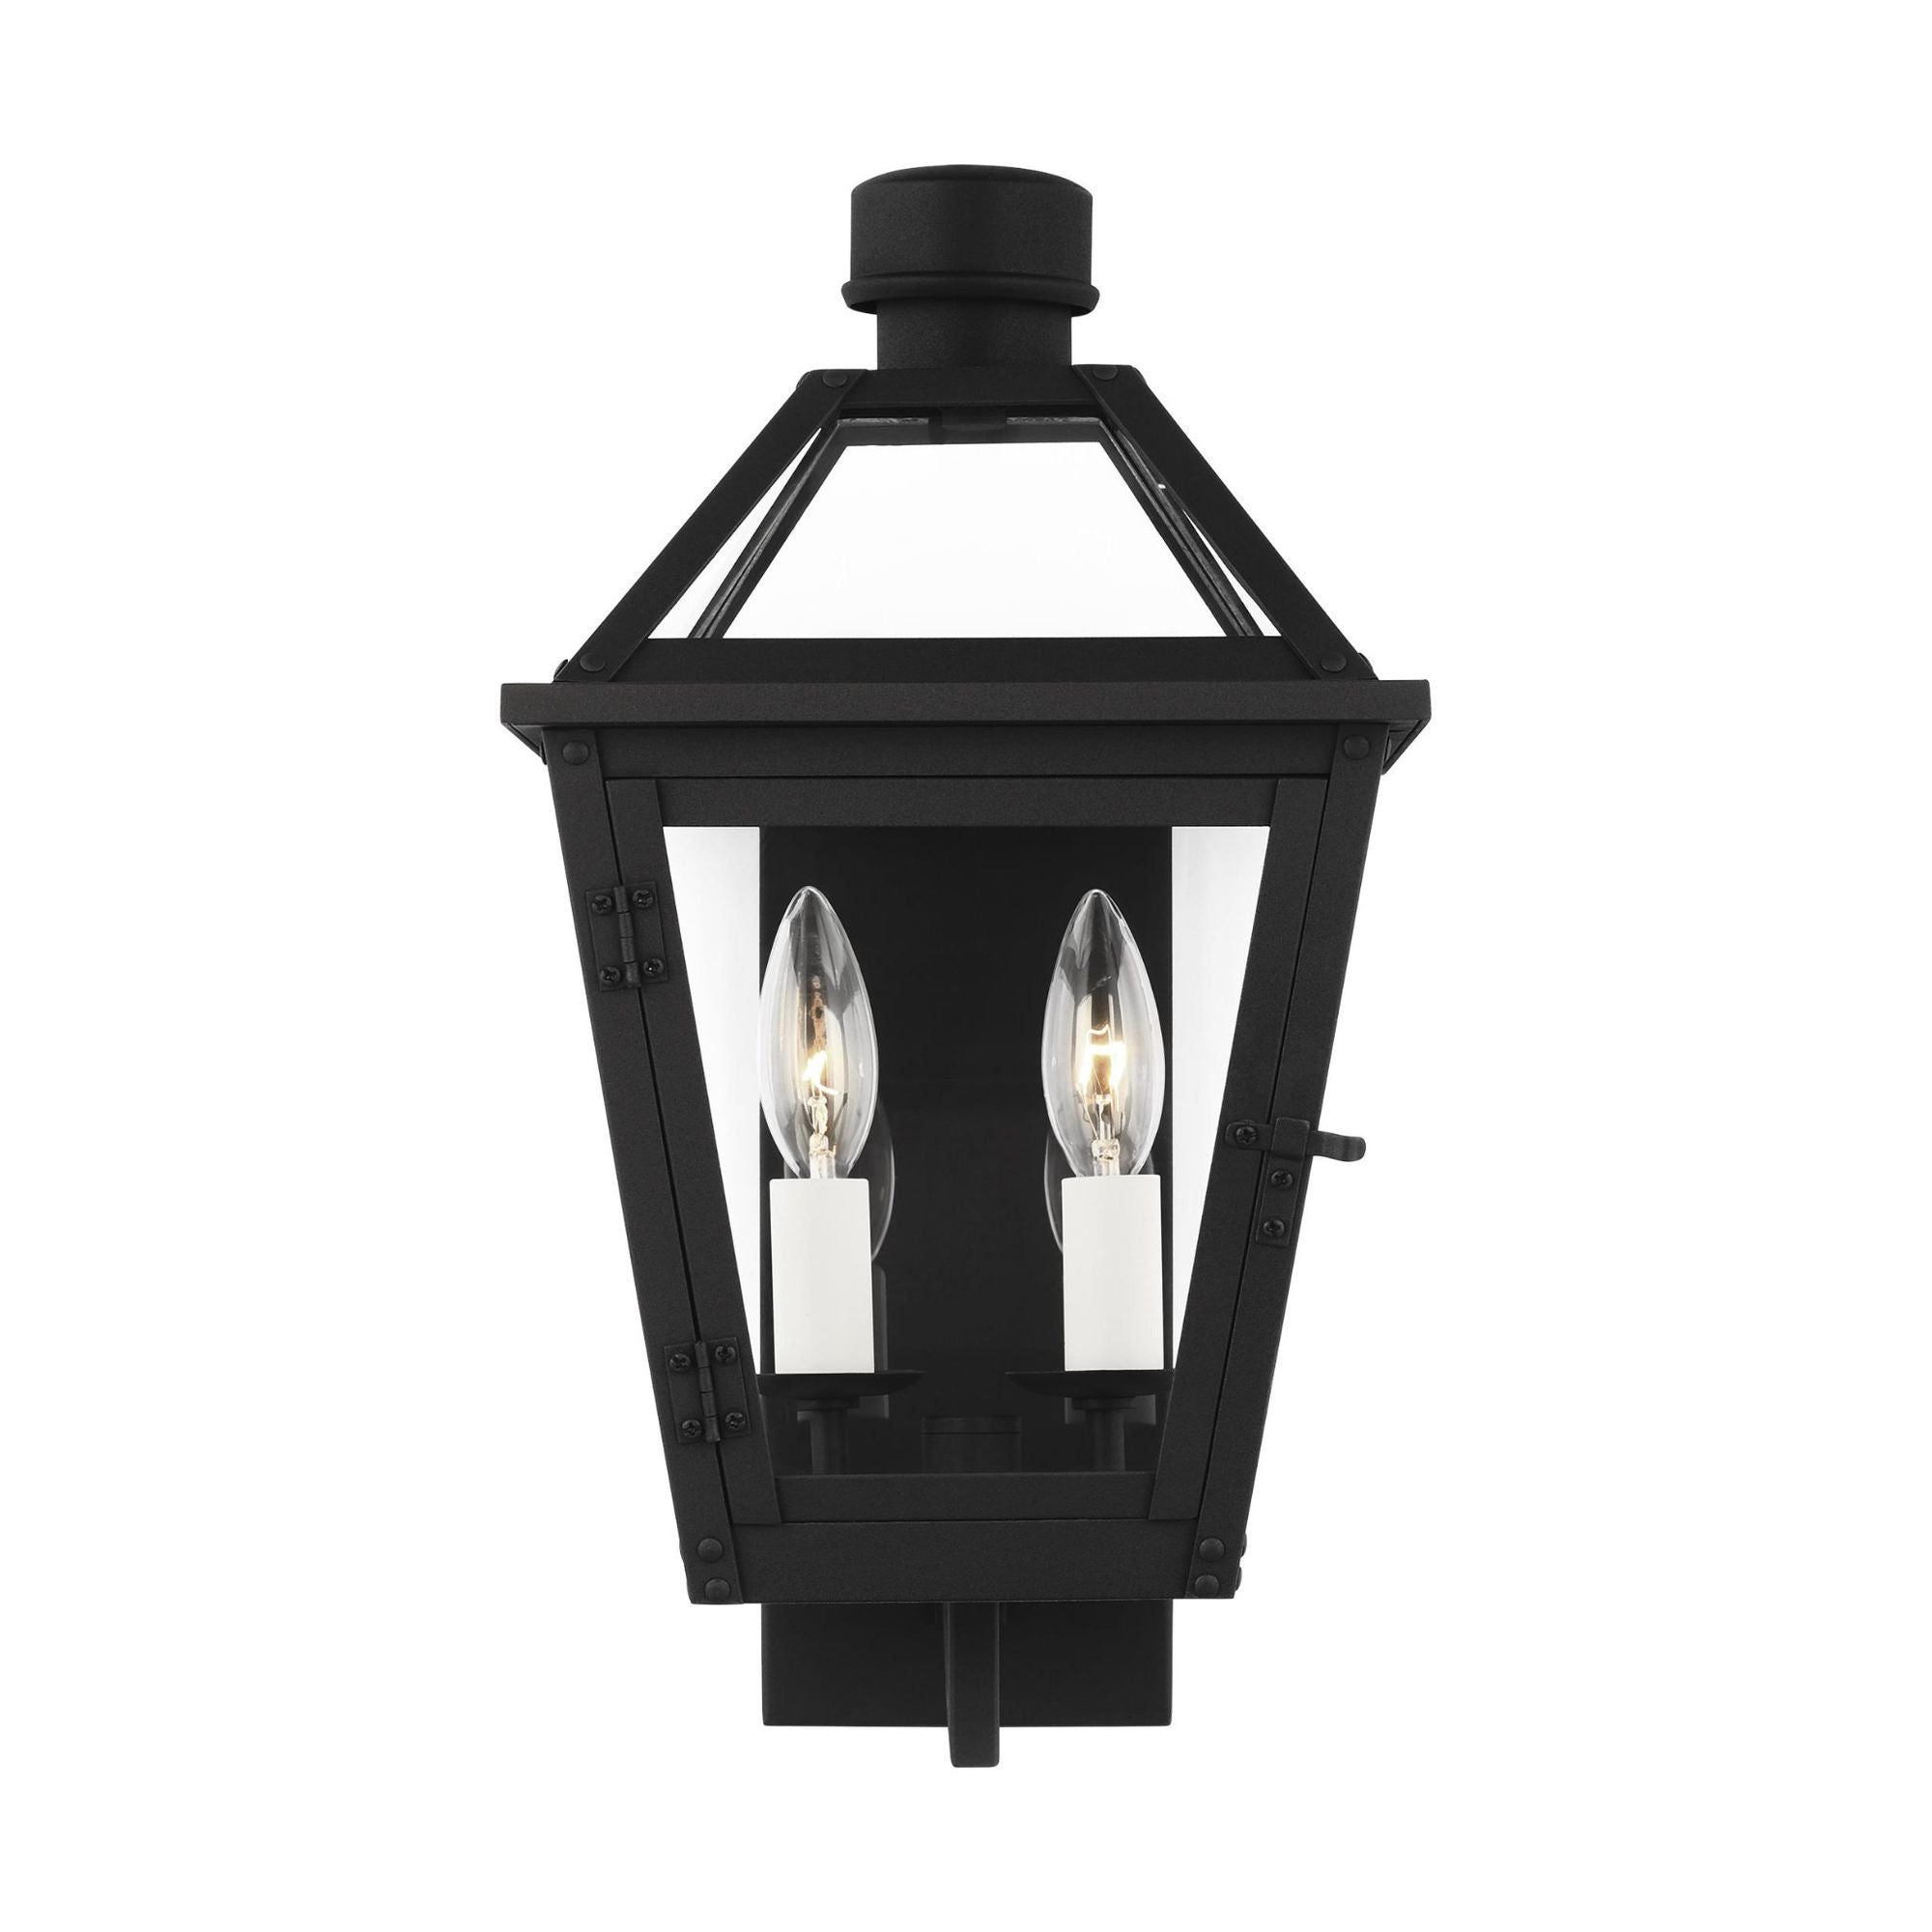 Chapman & Myers Hyannis Small Wall Lantern in Textured Black